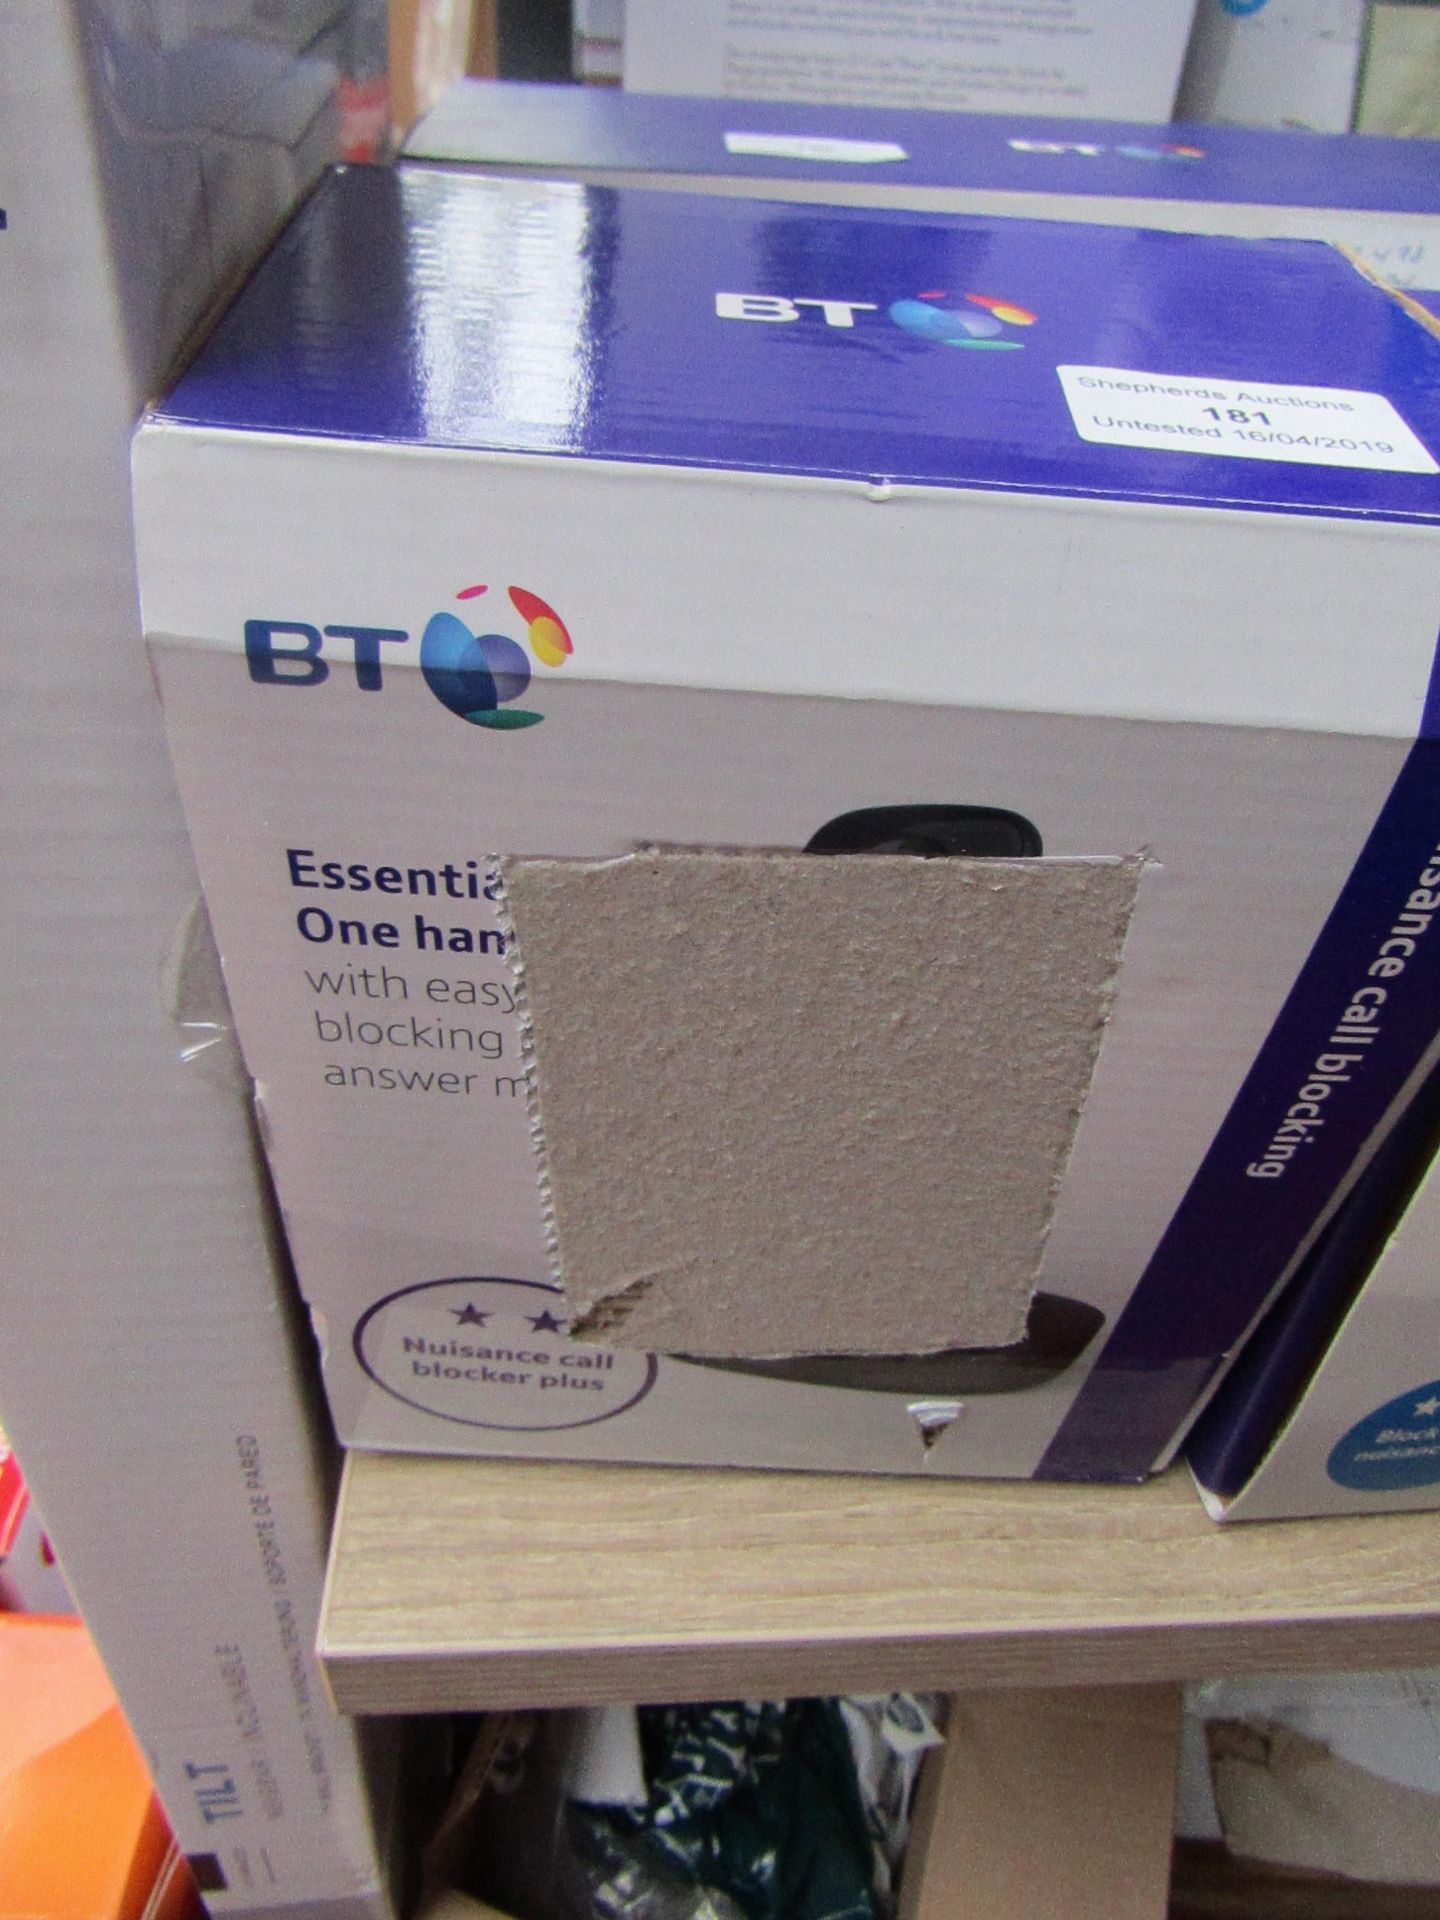 BT cordless phone untested and boxed